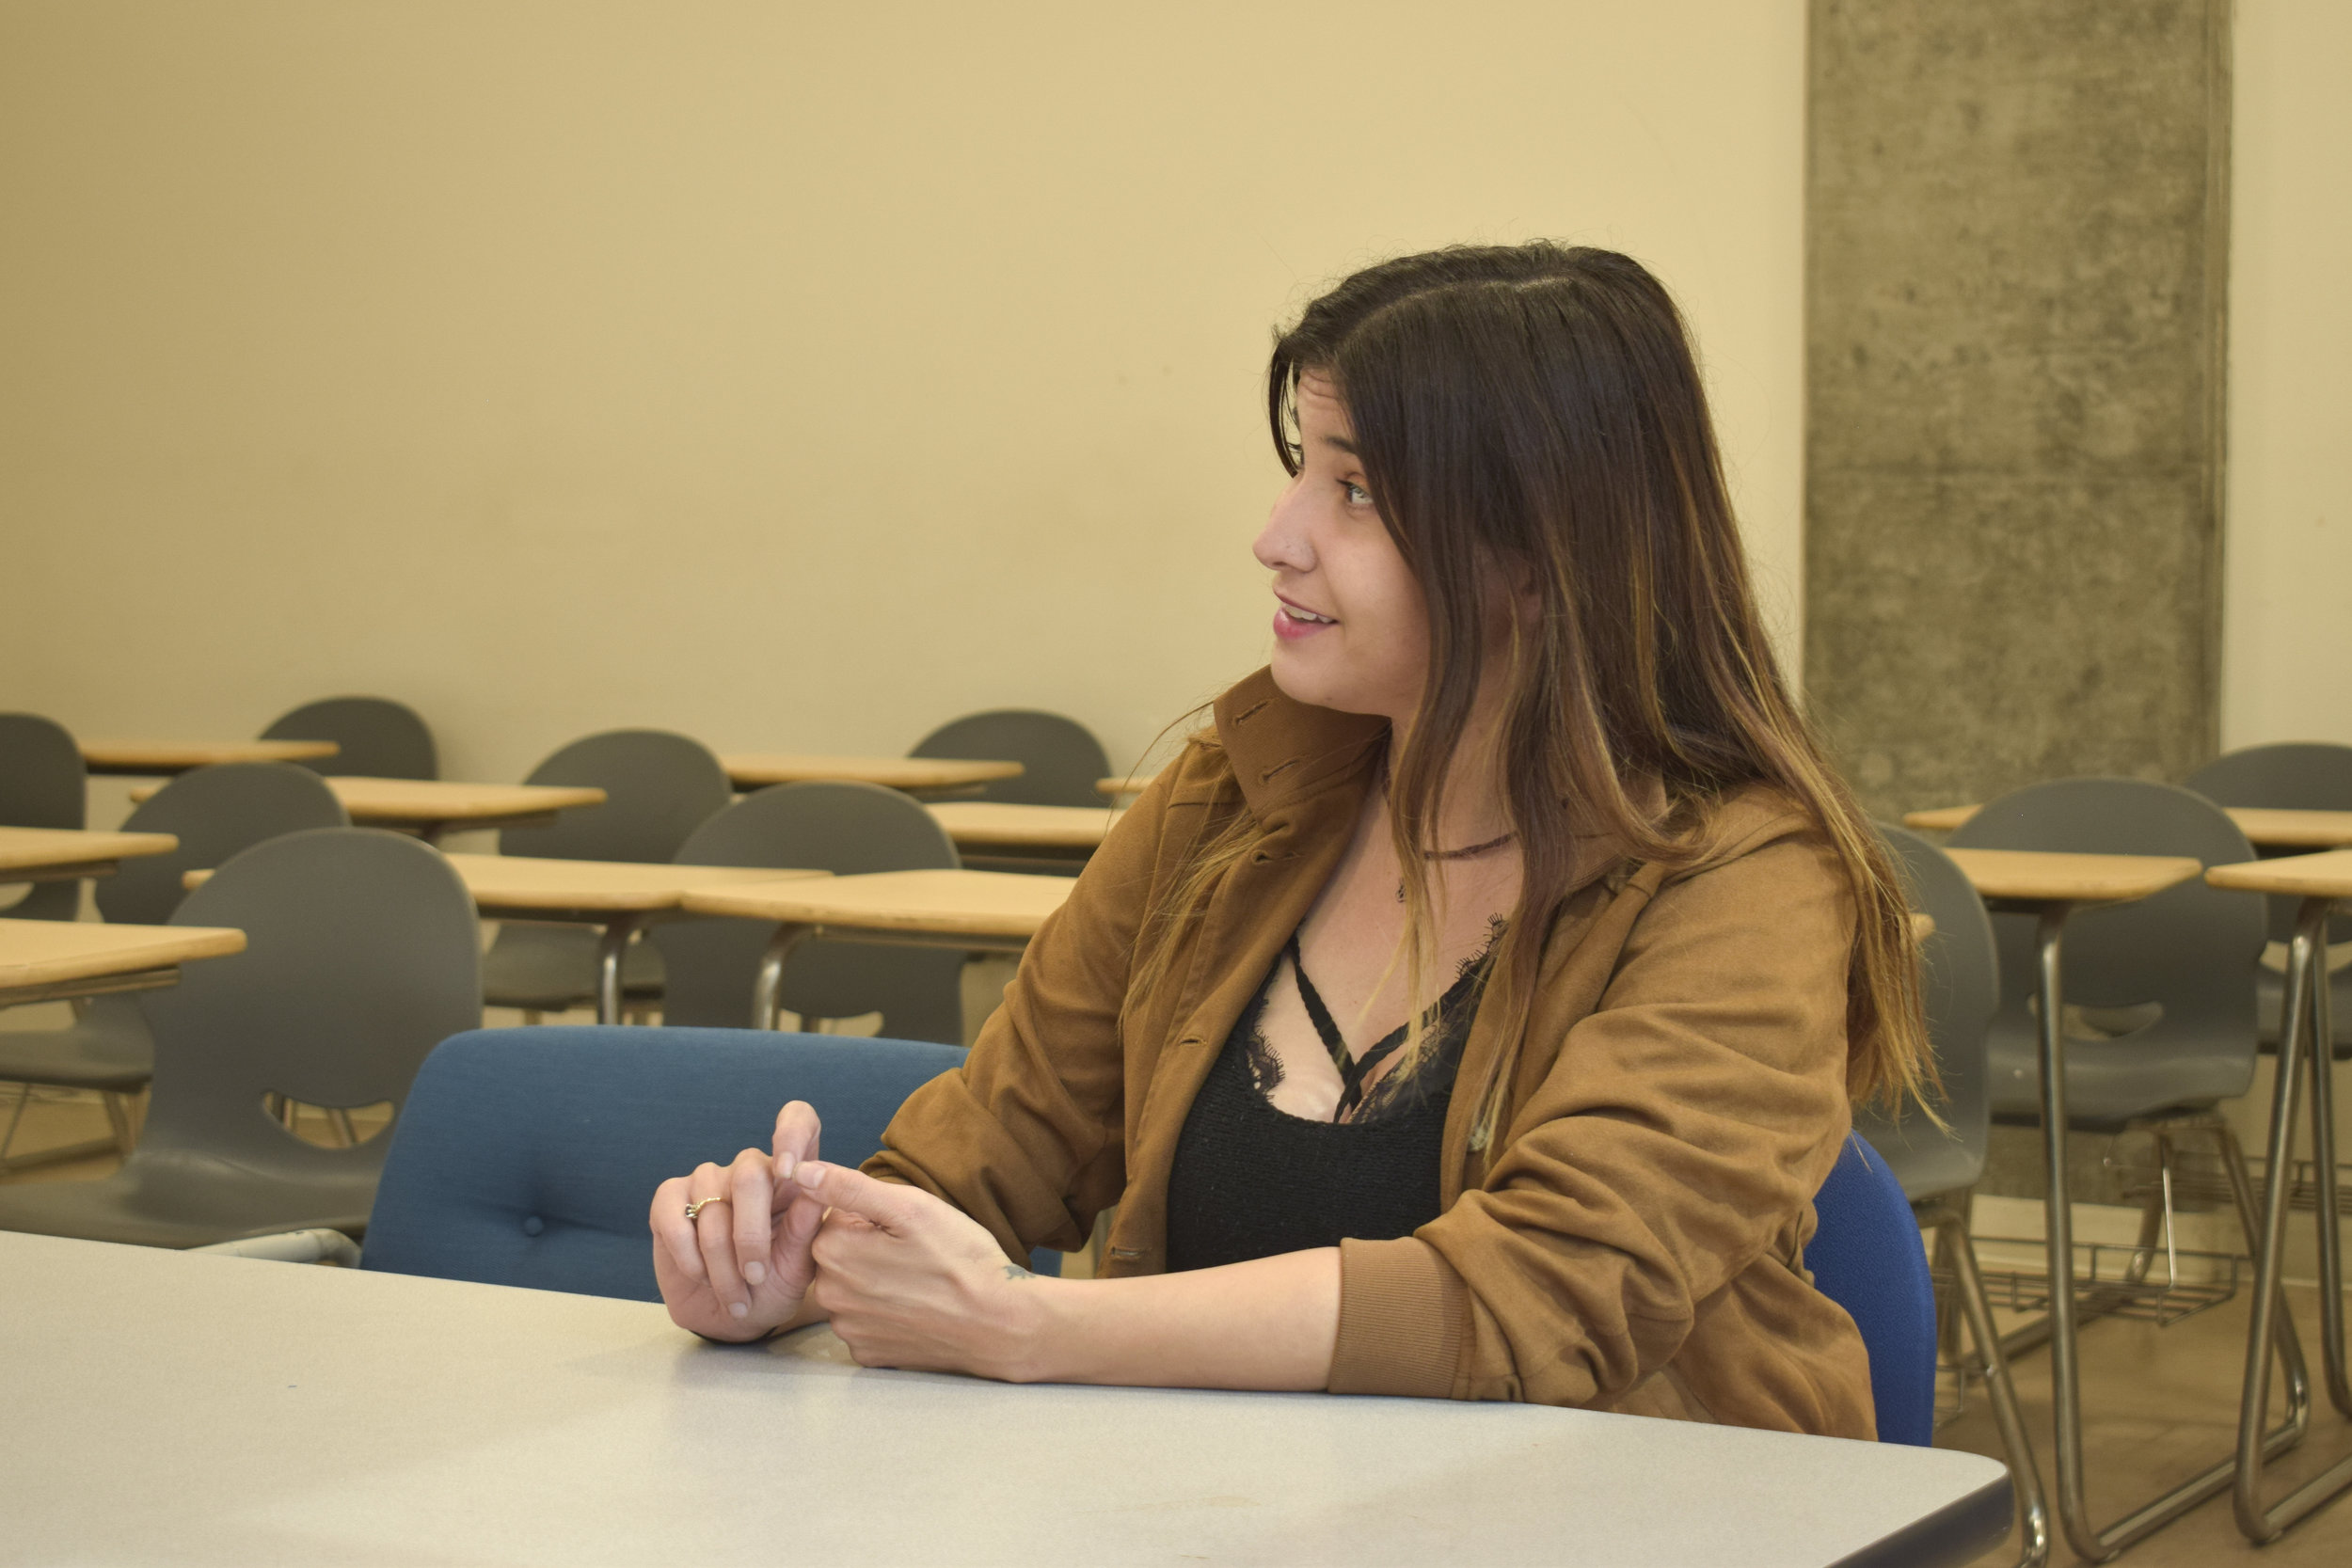  Brie Elise, president of the Women in Media Club, talking to the corsair about what she hopes to accomplish with the club and to someday have the club grow and include others besides SMC students. Tuesday May 8, 2018. Santa Monica, California.  (Dia